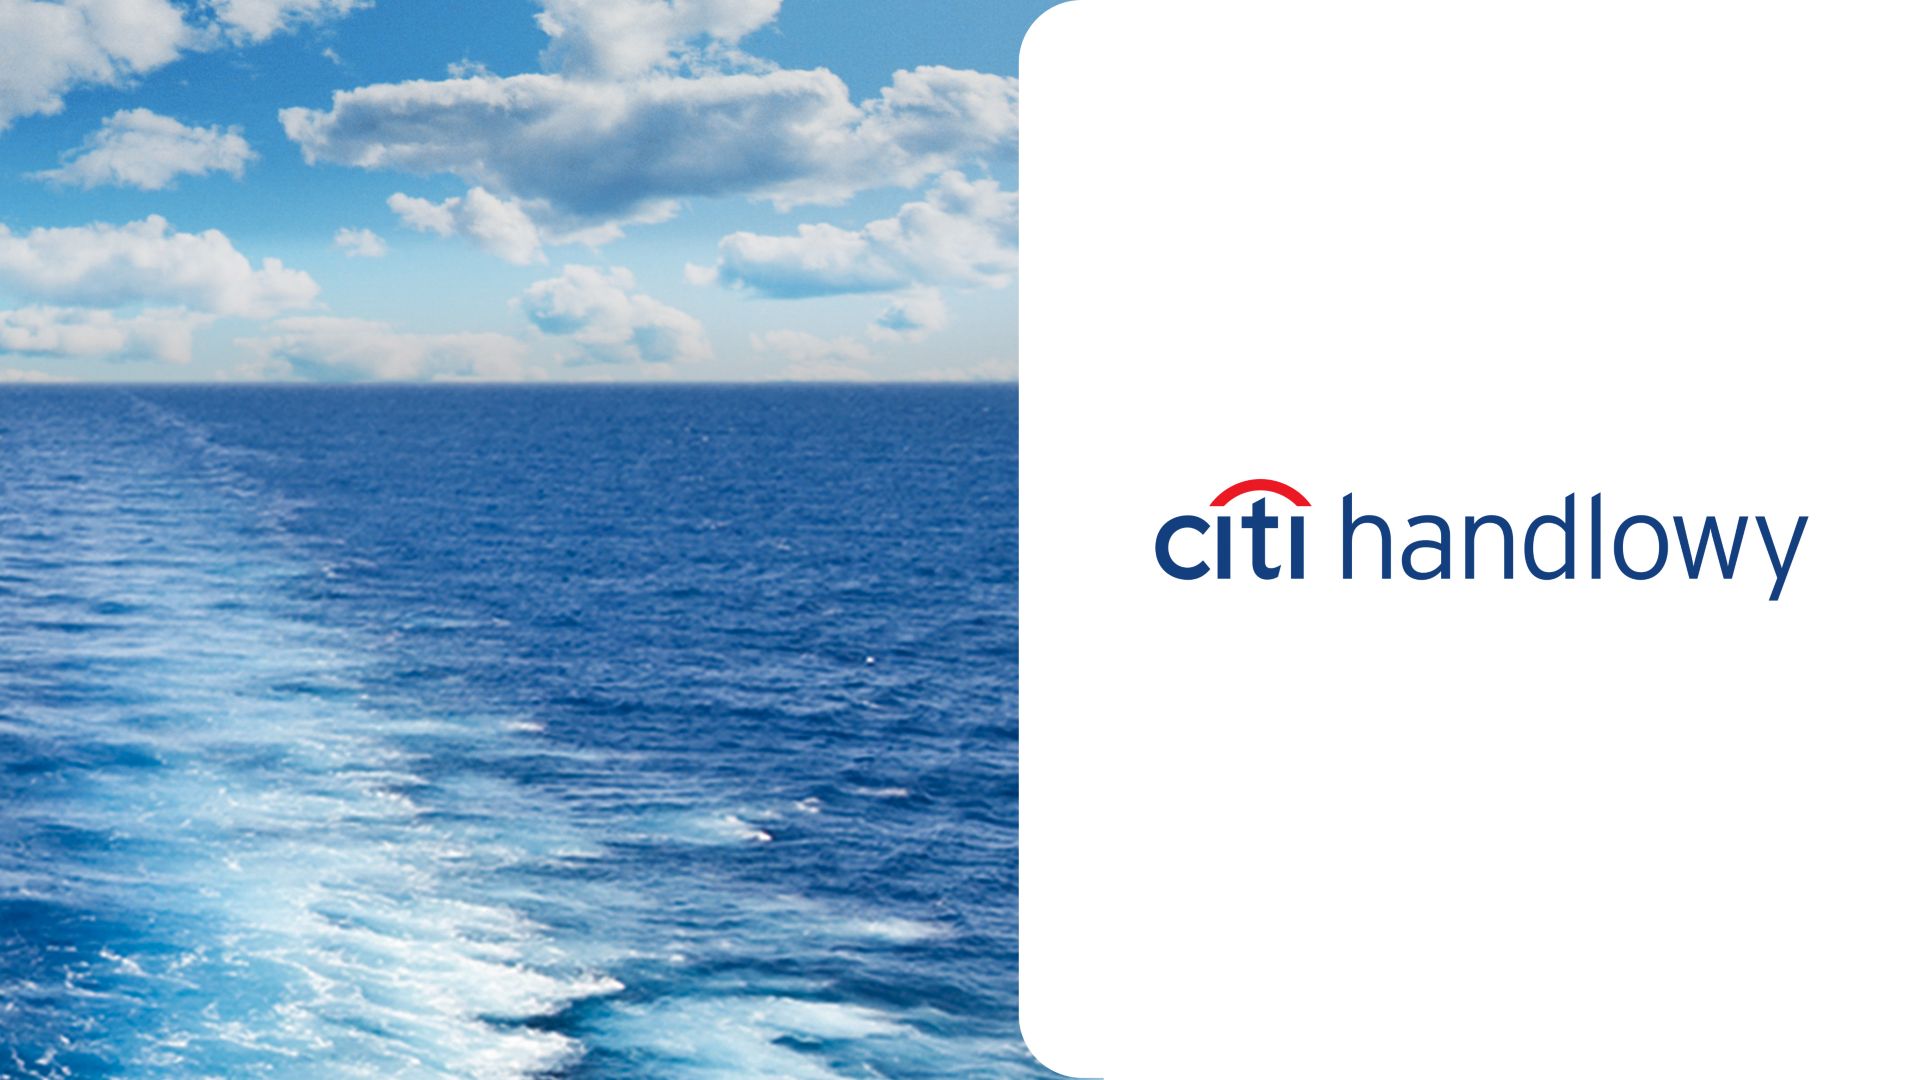 Special offers for Citi bank members